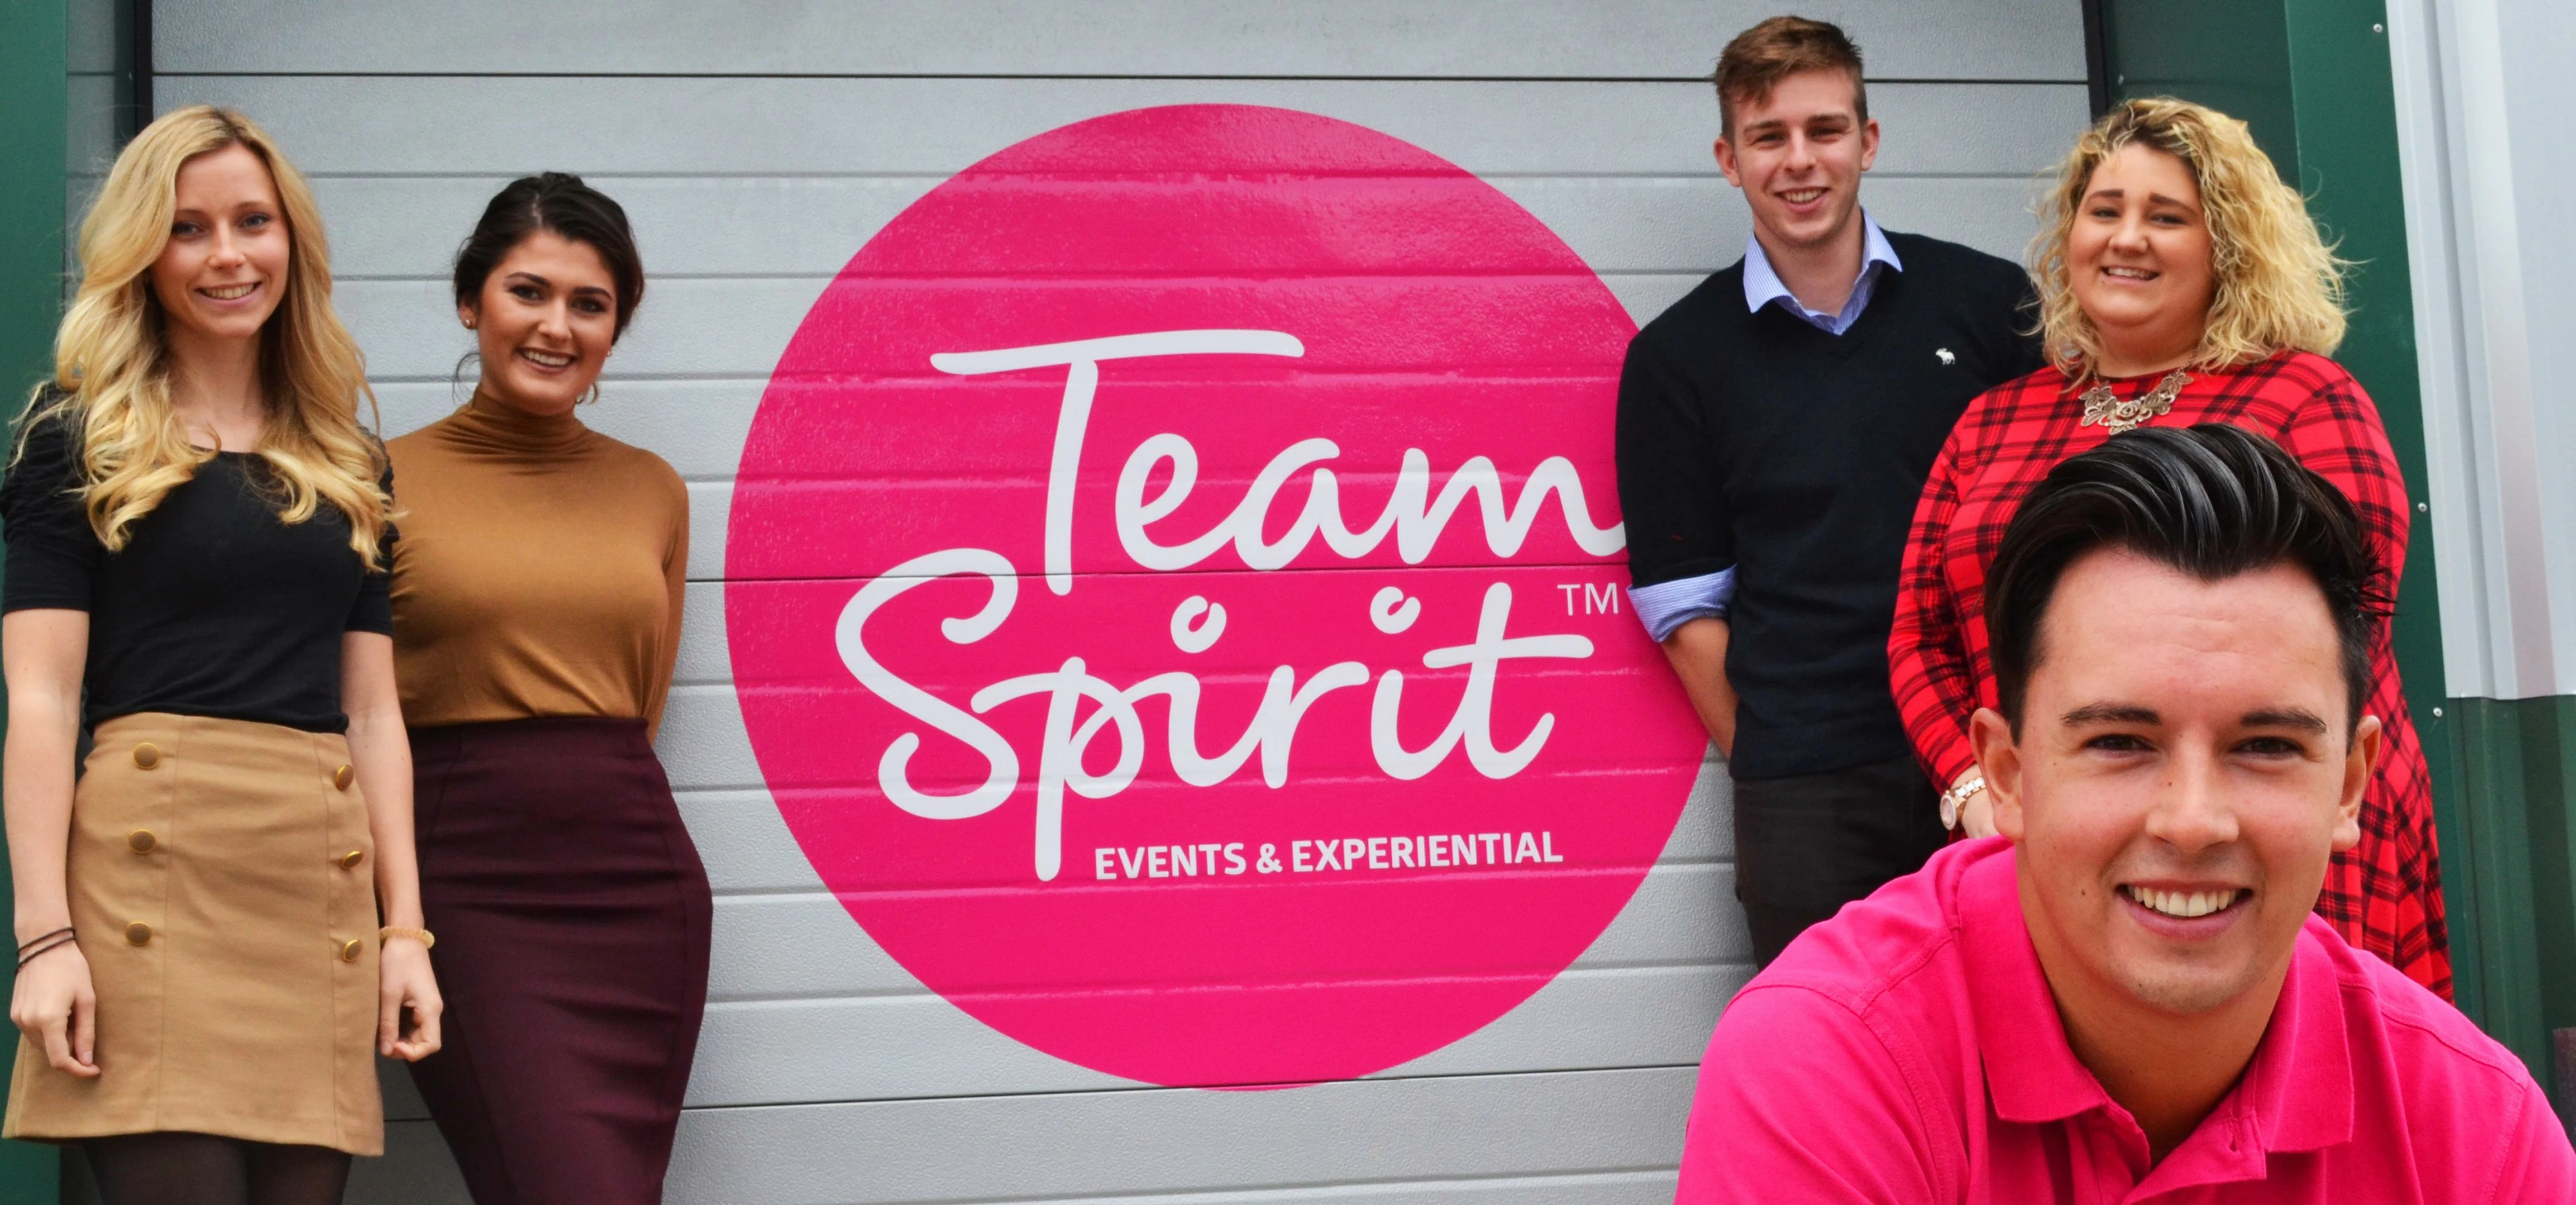 Pictured: Team Spirit's Rob Greenhalgh in the foreground, with (L-R) Natasha Kapp, Fay Taylor, Adam 